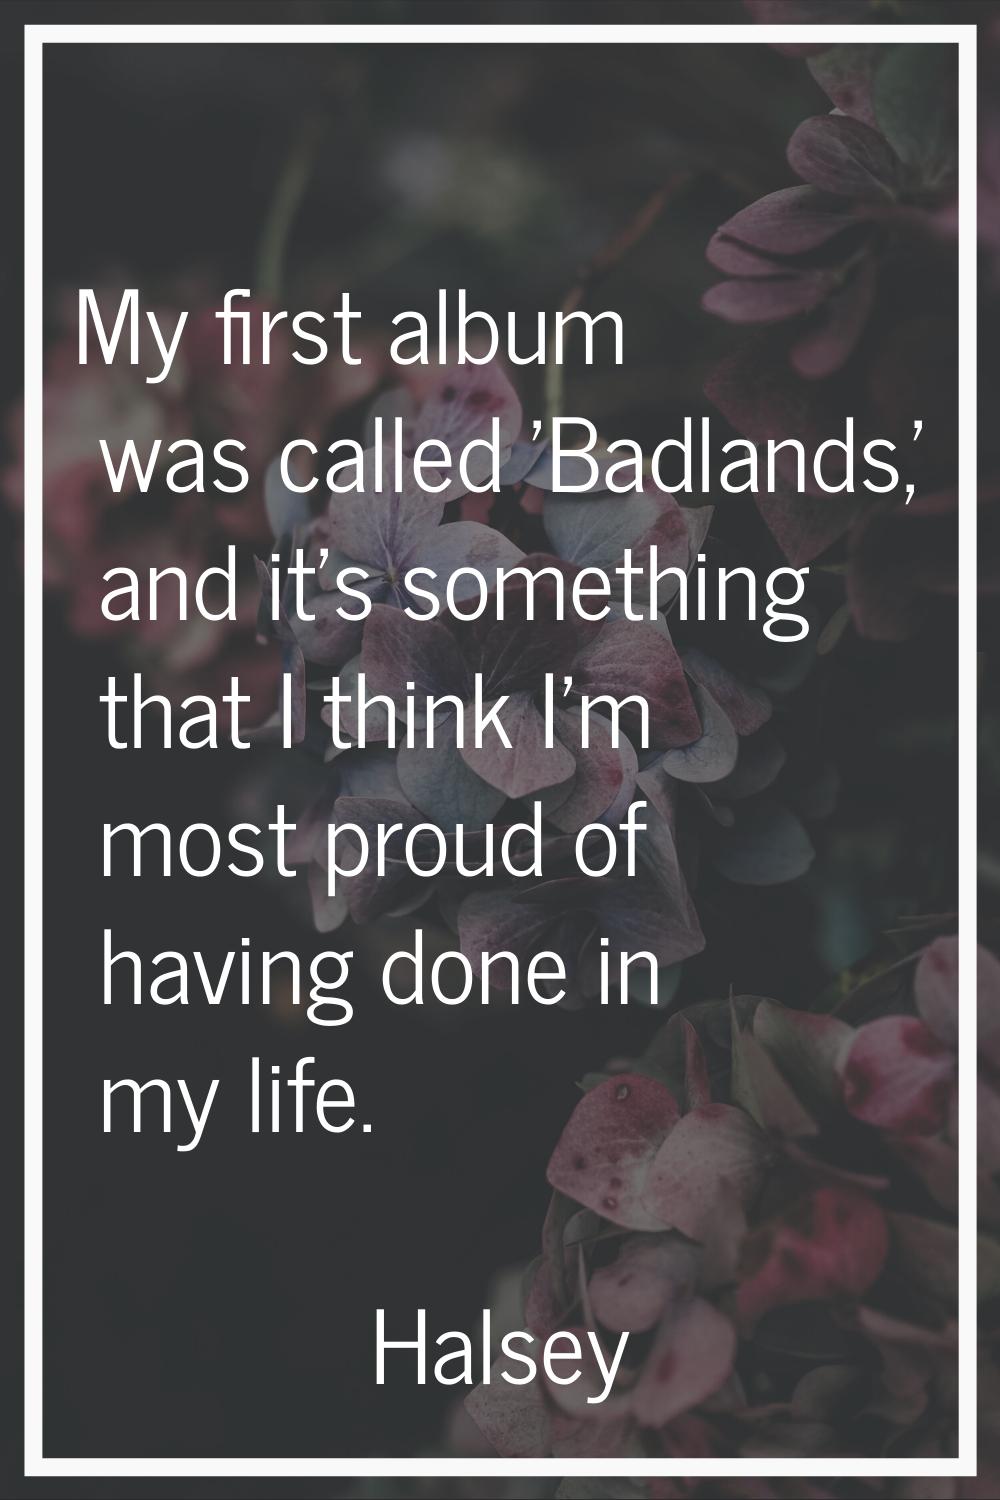 My first album was called 'Badlands,' and it's something that I think I'm most proud of having done